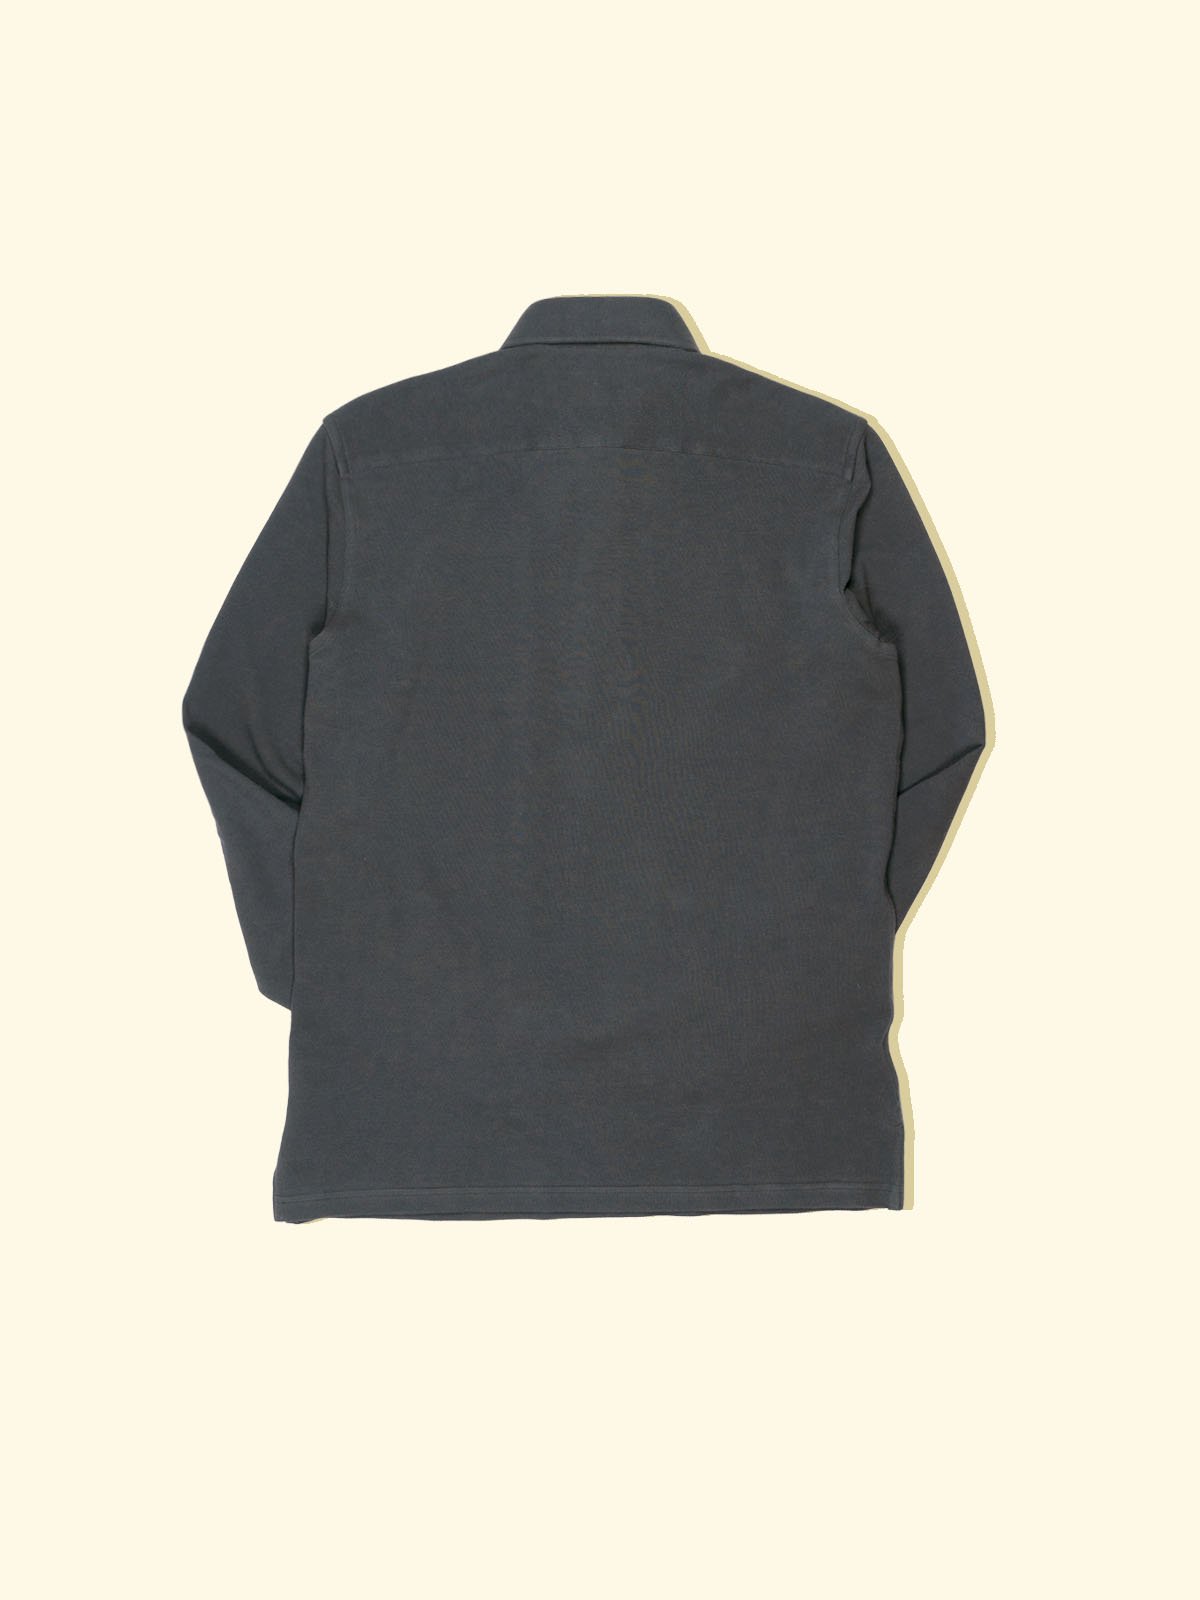 Pique Long Sleeve Spread Collar Polo - Steel Grey — The Anthology